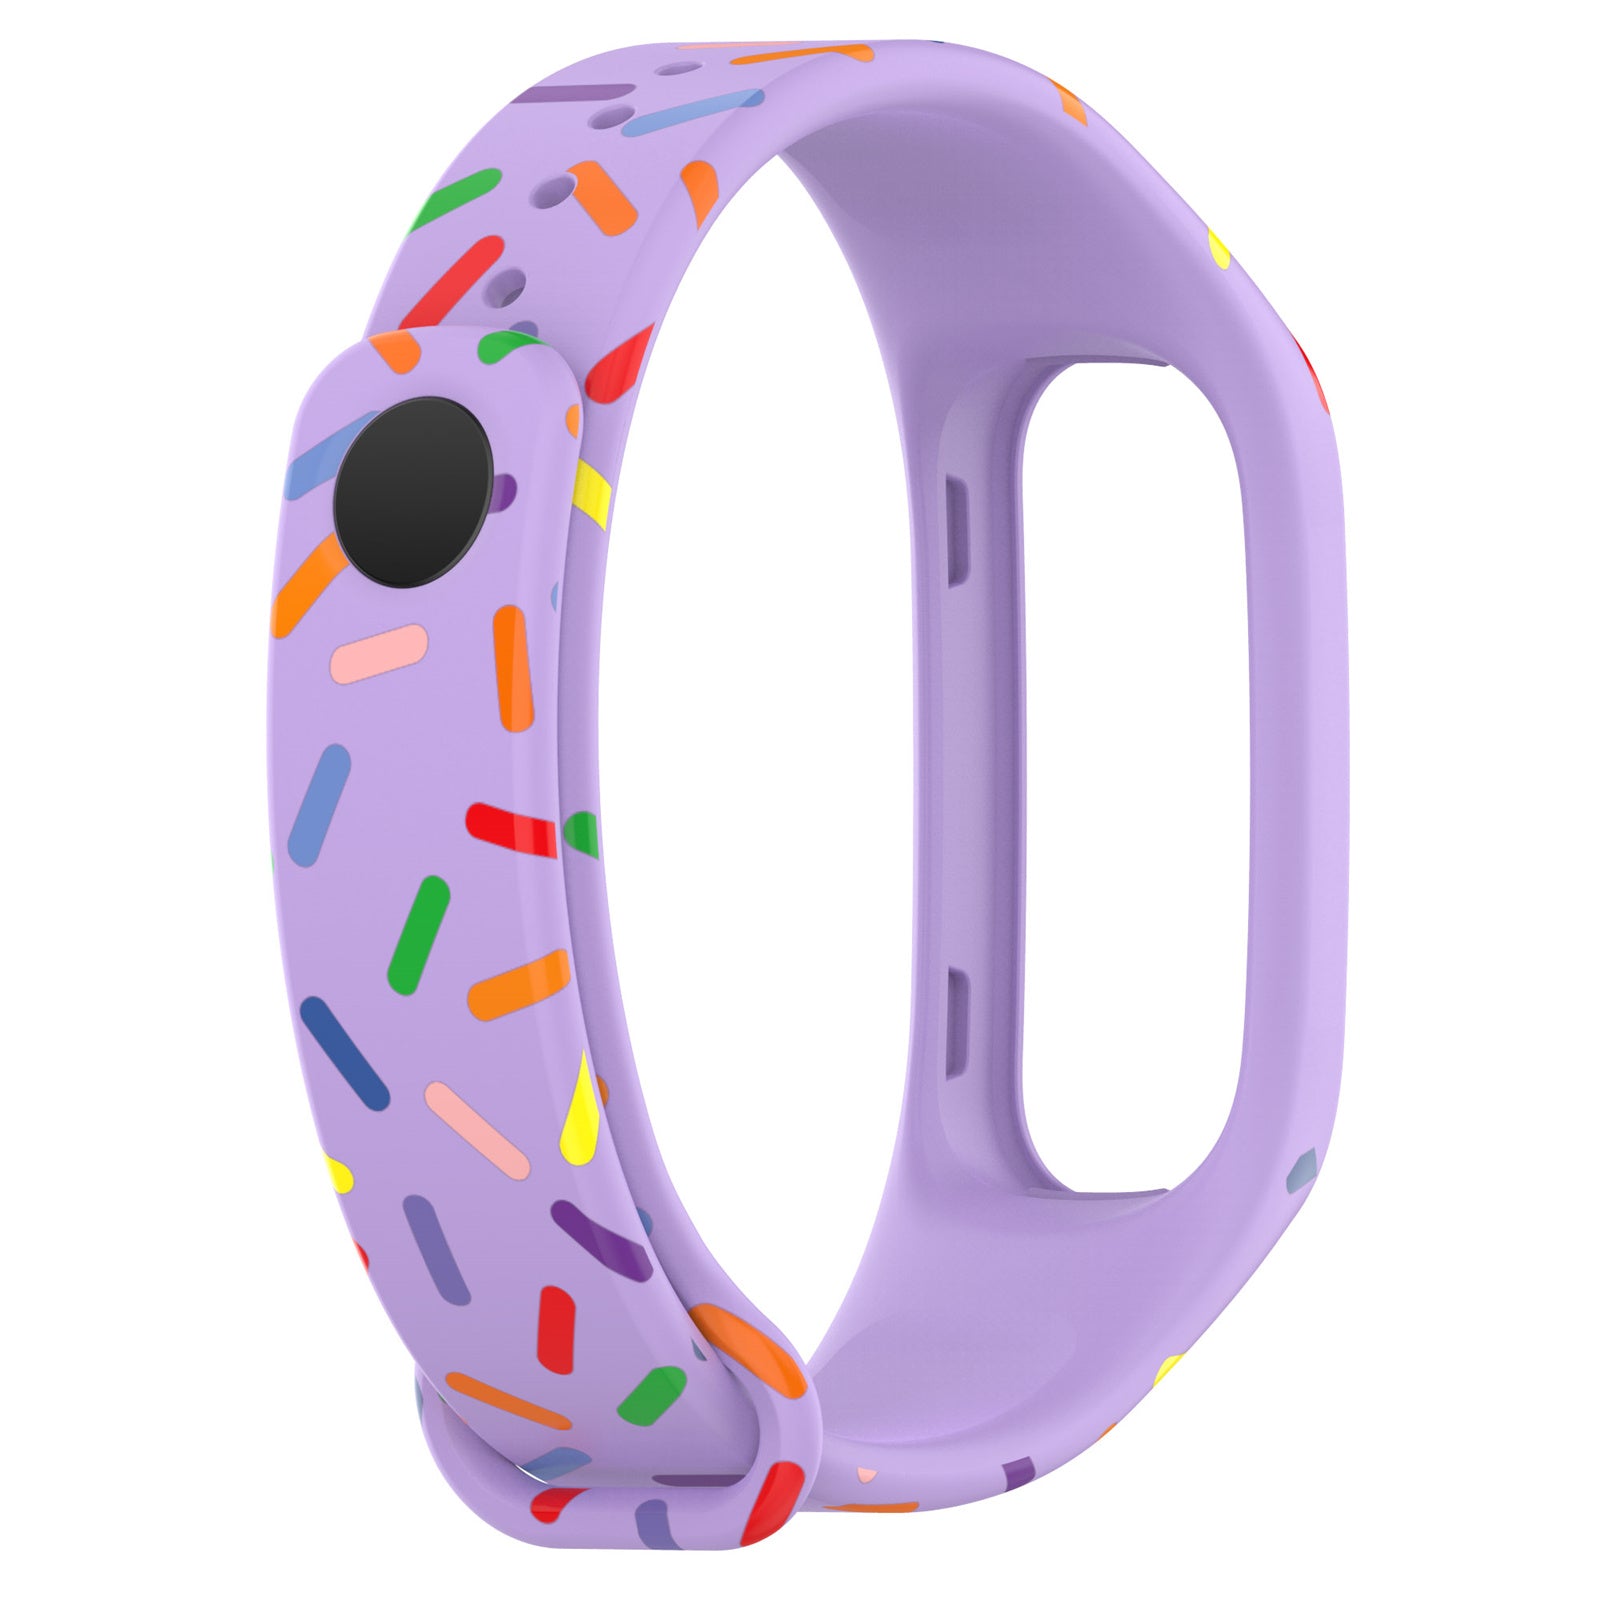 Uniqkart for Oppo Band Integrated Silicone Strap Watch Case Colorful Spotted Wrist Band - Purple